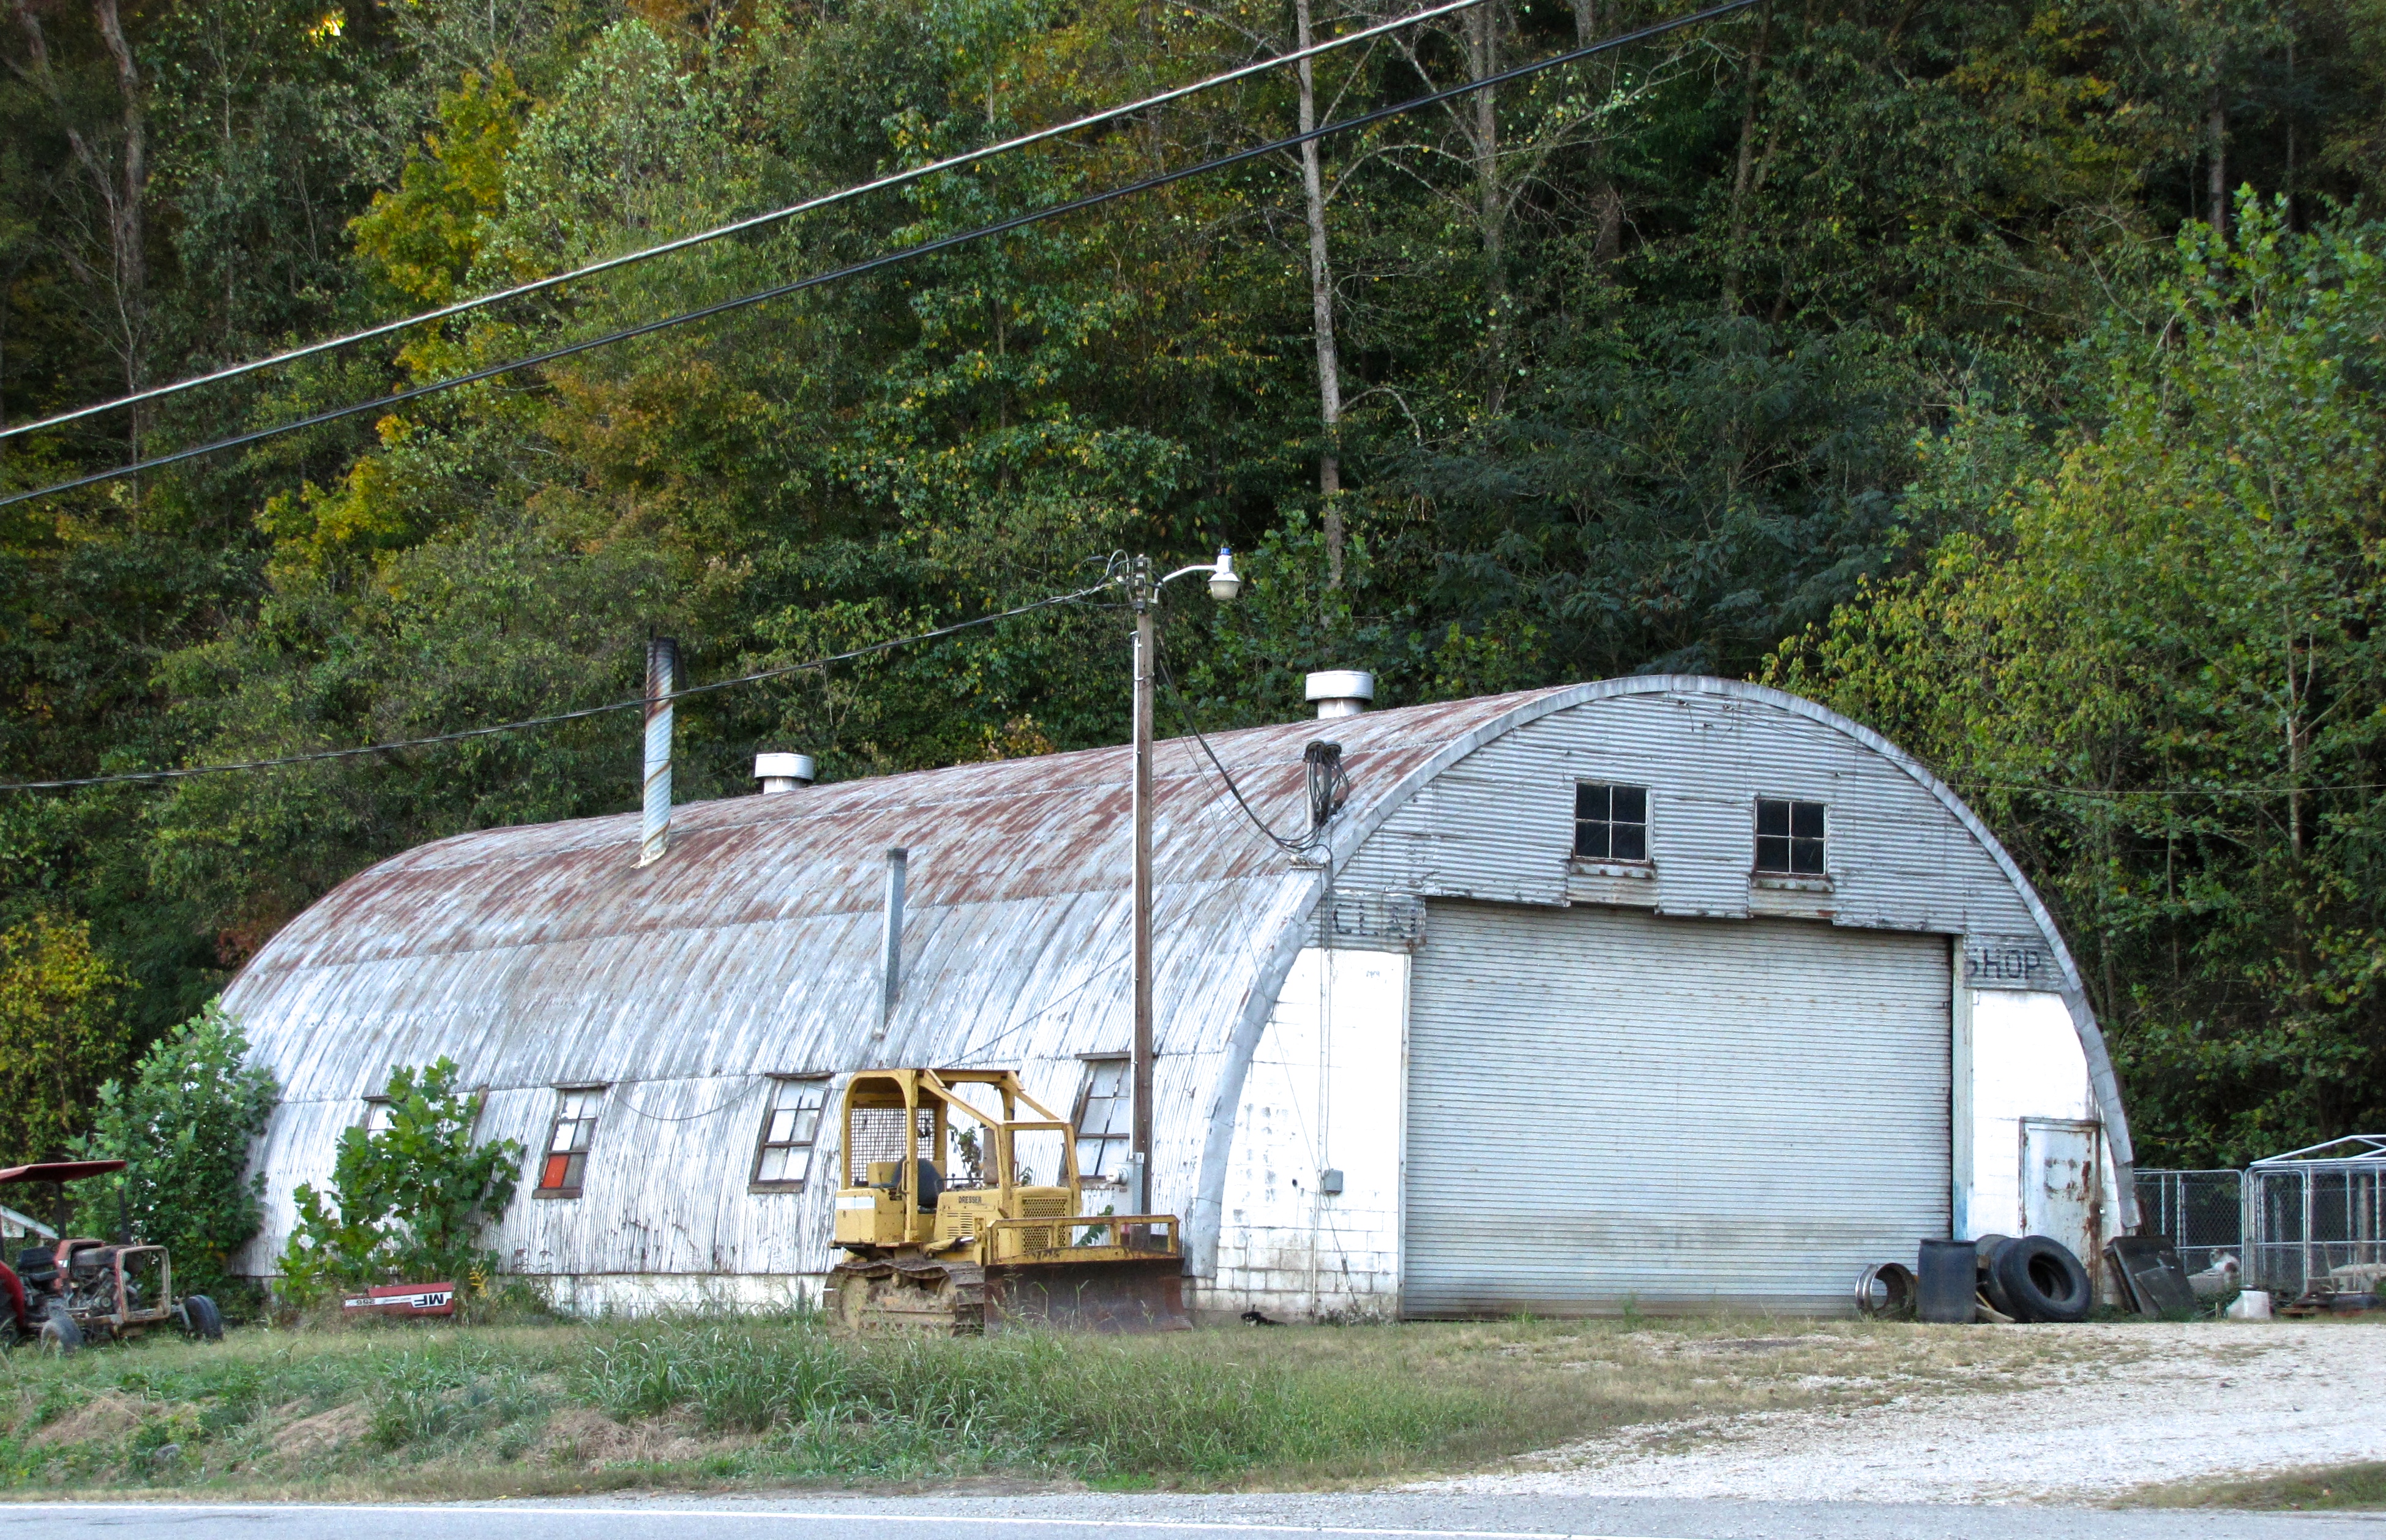 quonset hut in About Us, KY